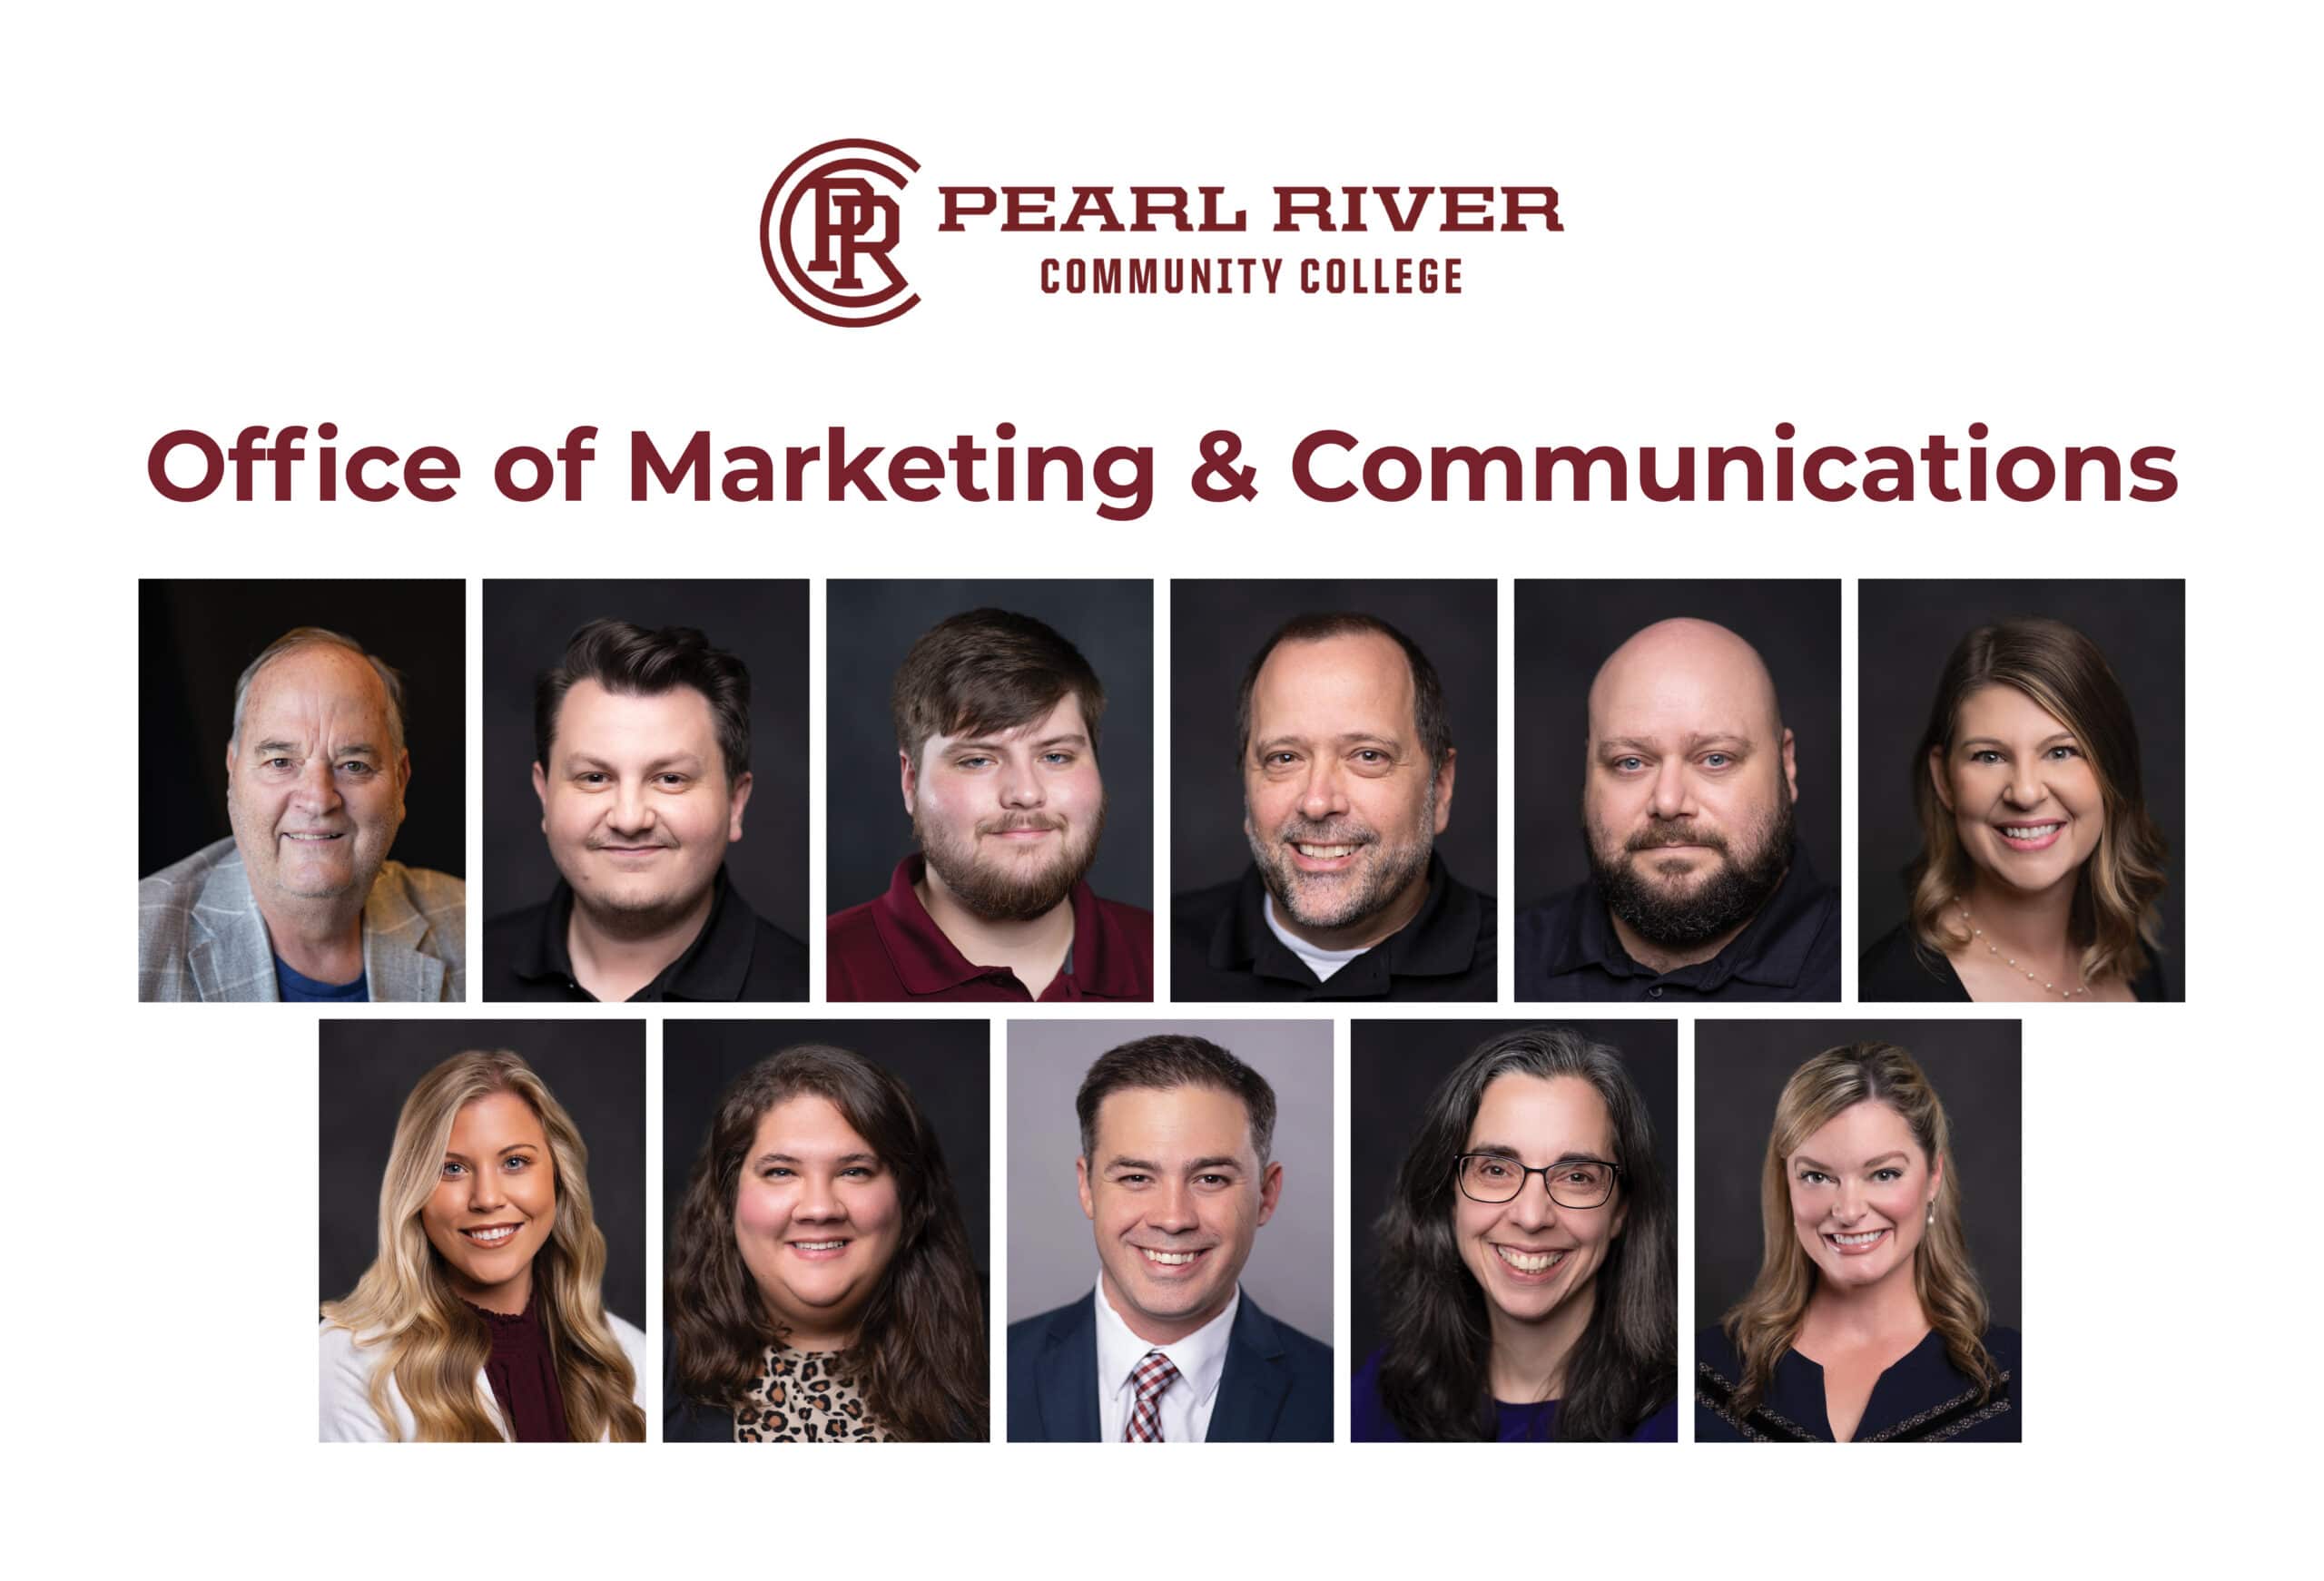 Pearl River Community College Office of Marketing and Communications; 6 men and 1 woman on top row, 4 women and 1 man on bottom row